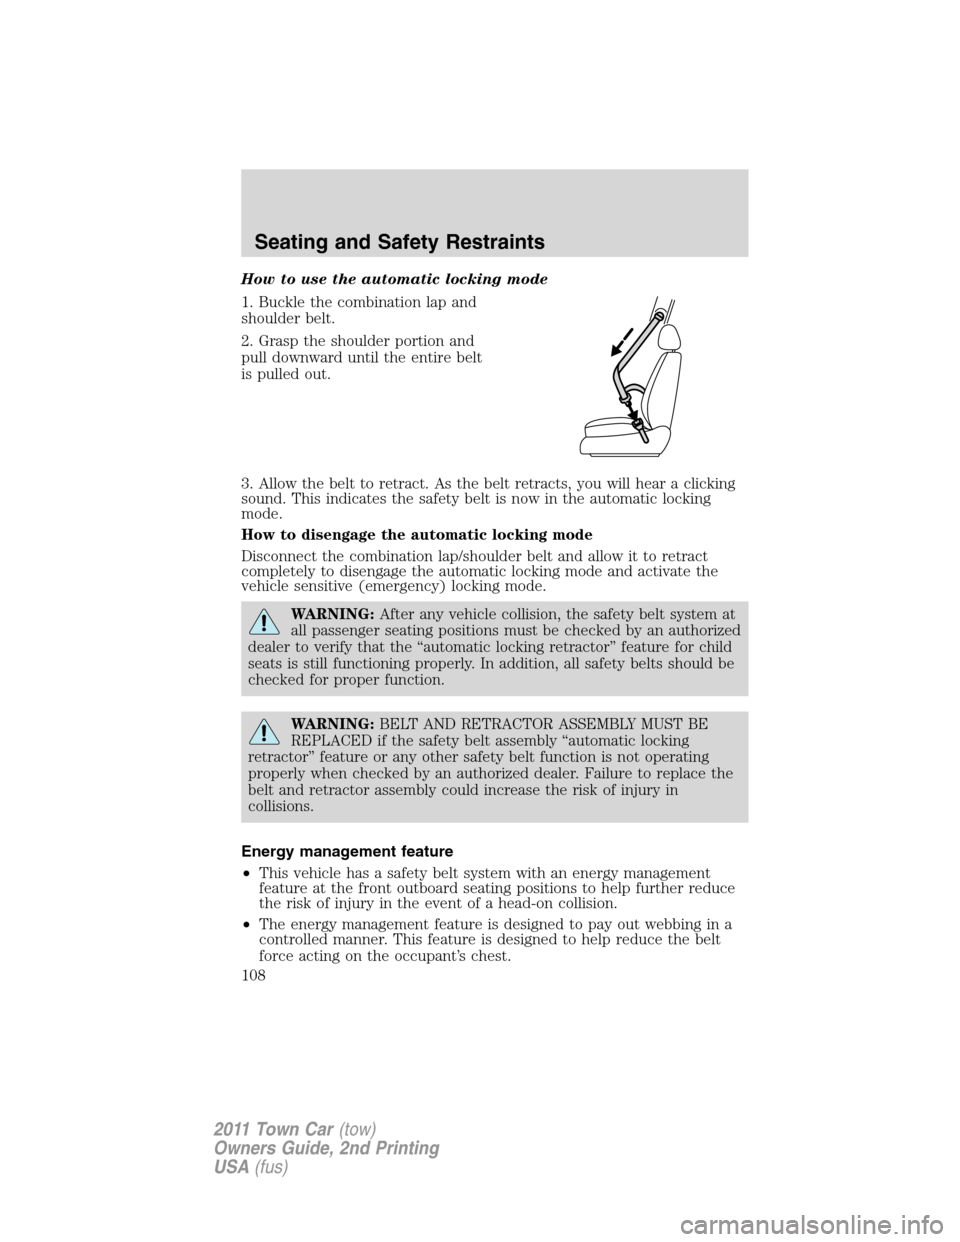 LINCOLN TOWN CAR 2011 Service Manual How to use the automatic locking mode
1. Buckle the combination lap and
shoulder belt.
2. Grasp the shoulder portion and
pull downward until the entire belt
is pulled out.
3. Allow the belt to retract